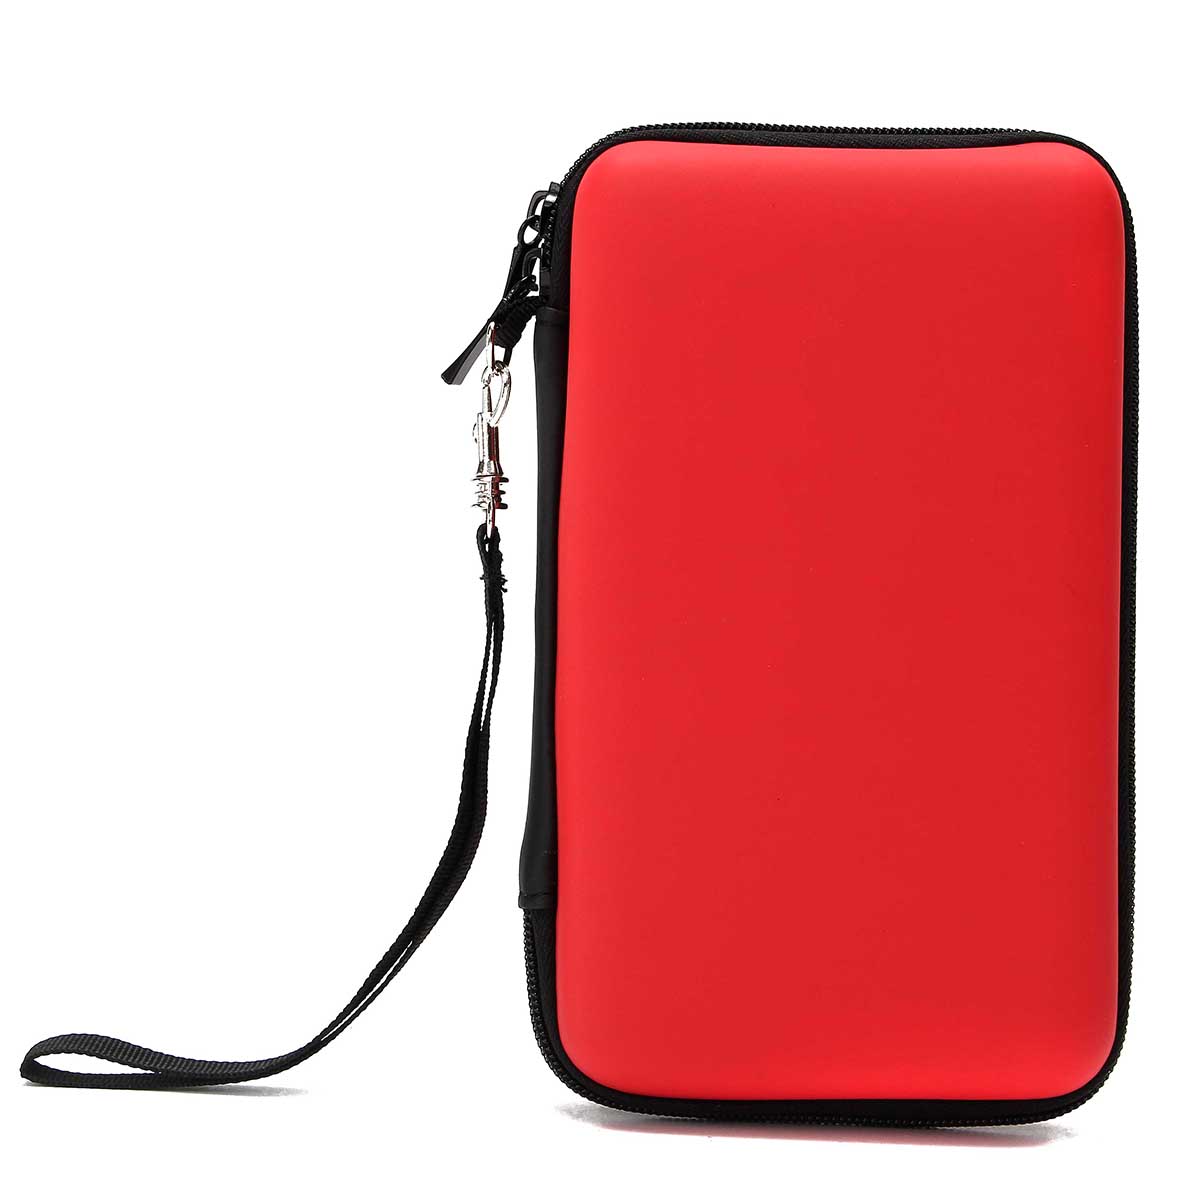 EVA Hard Protective Carrying Case Cover Handle Bag For Nintendo New 2DS LL/XL 44